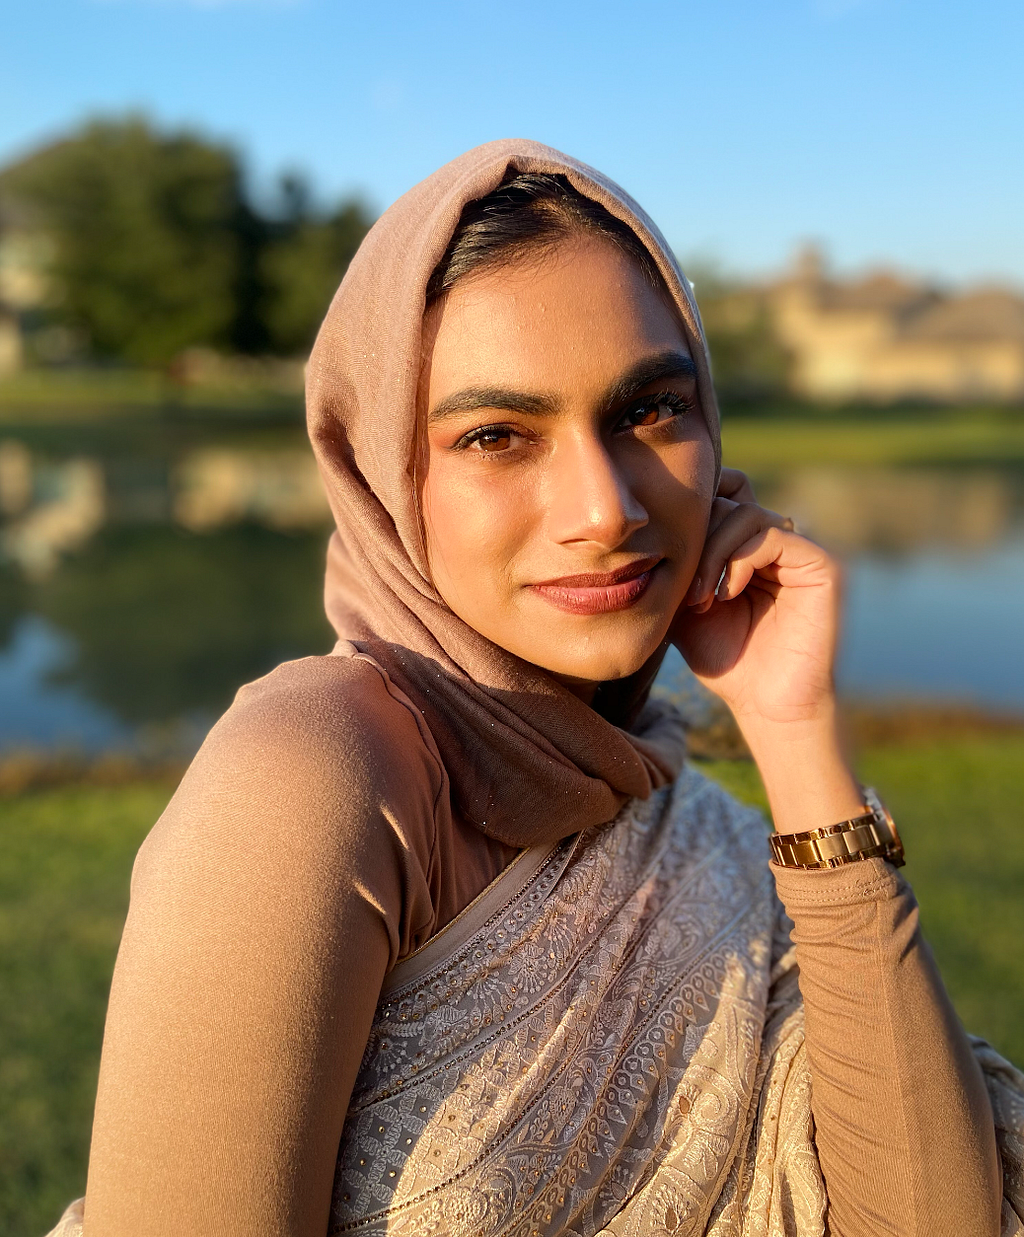 Anika poses in front of a lake on a sunny day, wearing a beige hijab and matching top.